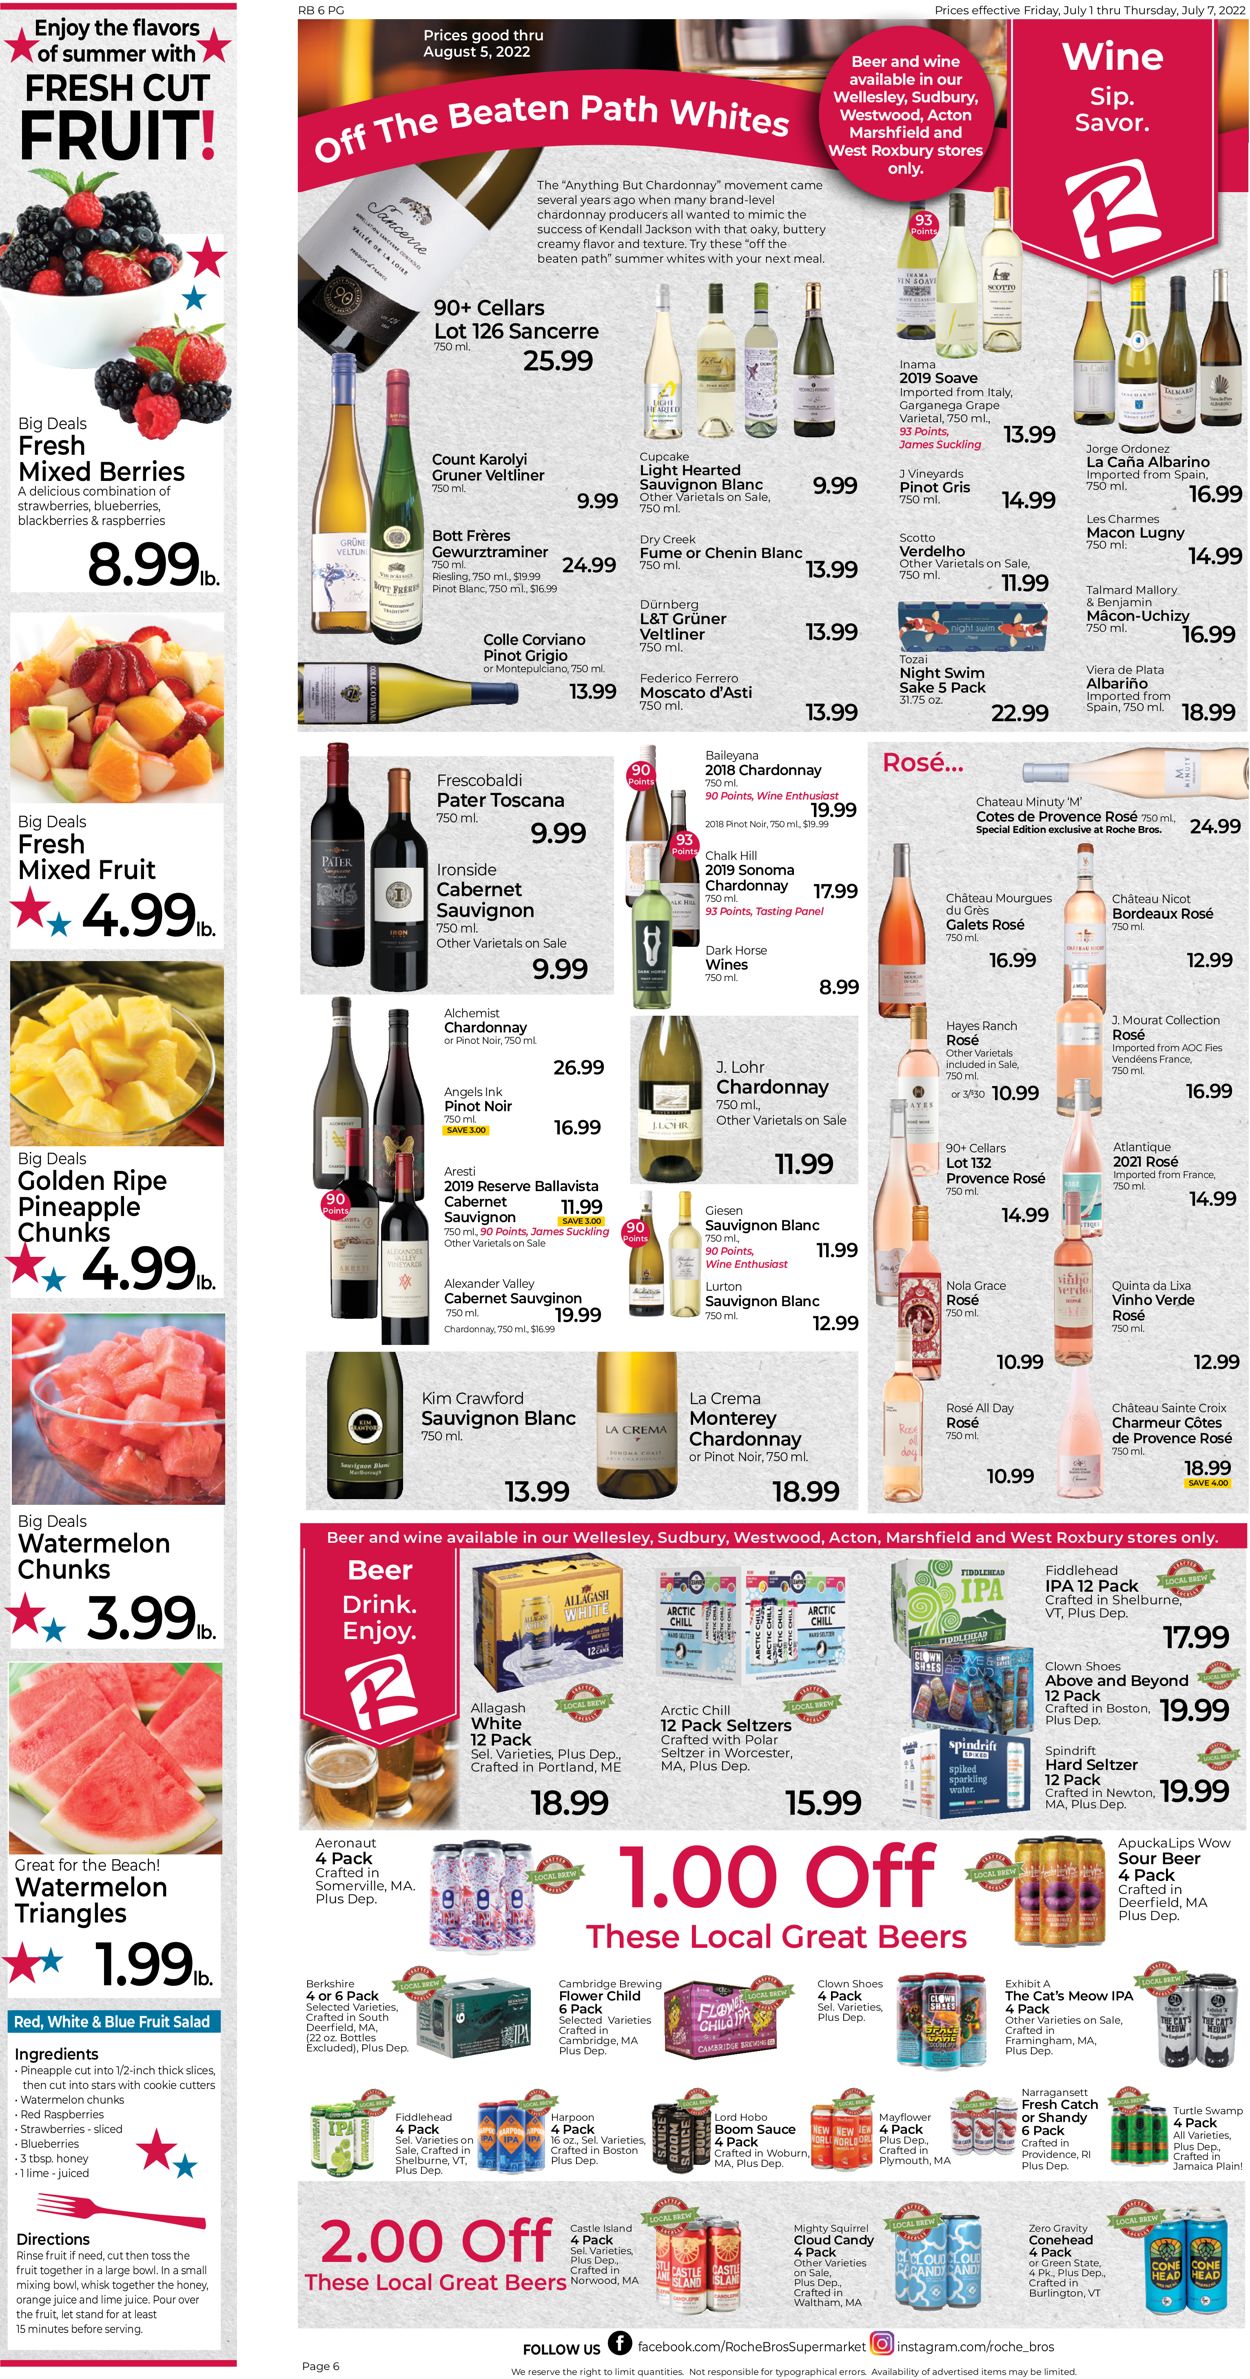 Roche Bros. Supermarkets - 4th of July Sale Weekly Ad Circular - valid 07/01-07/07/2022 (Page 6)